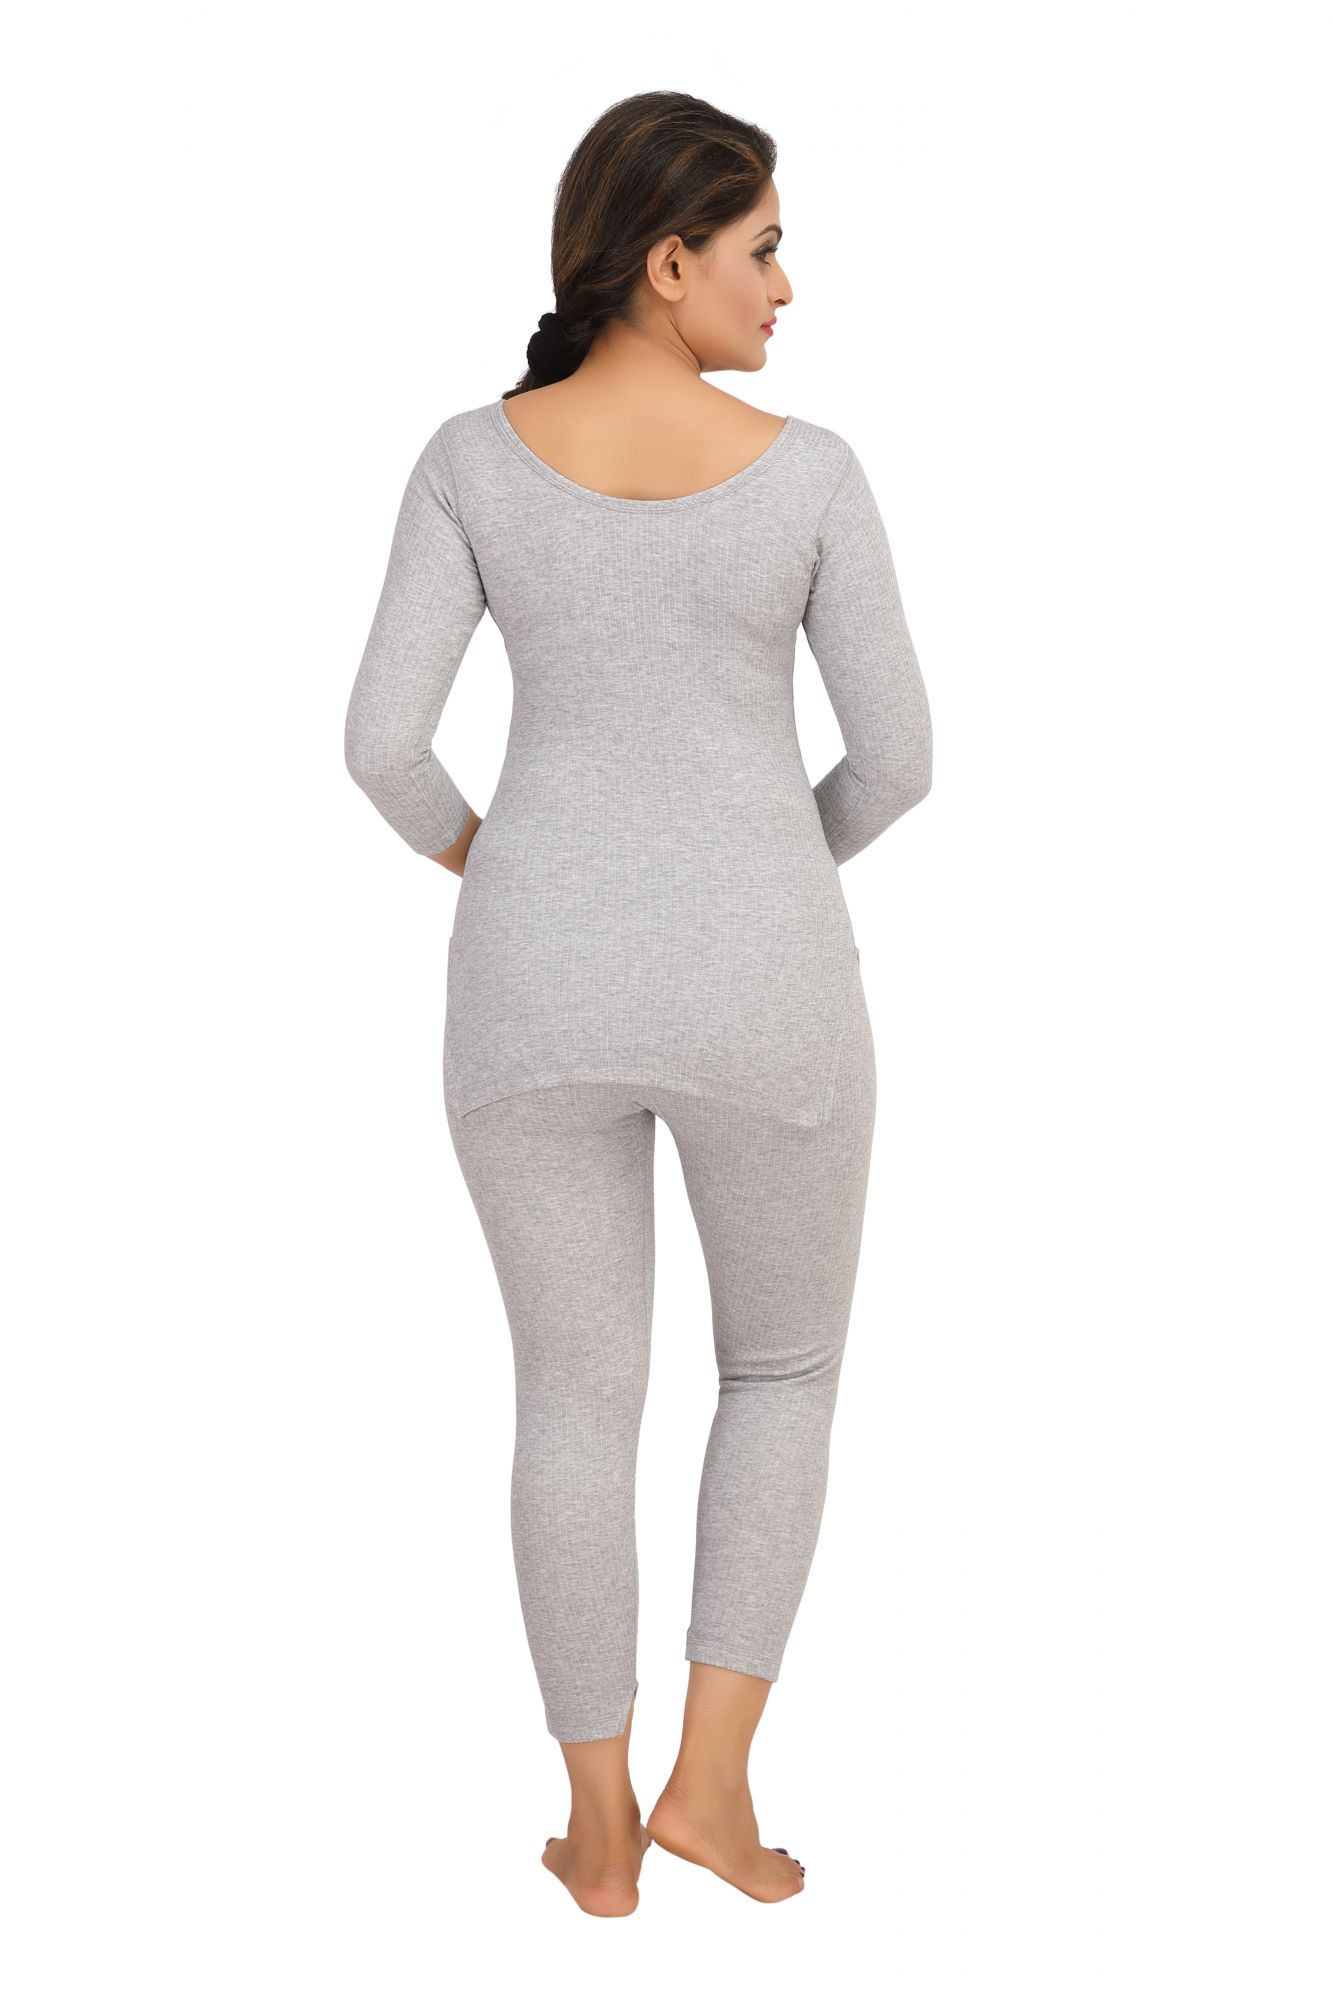 Cotton Quilted Thermal Top Full Sleeves- Light Grey